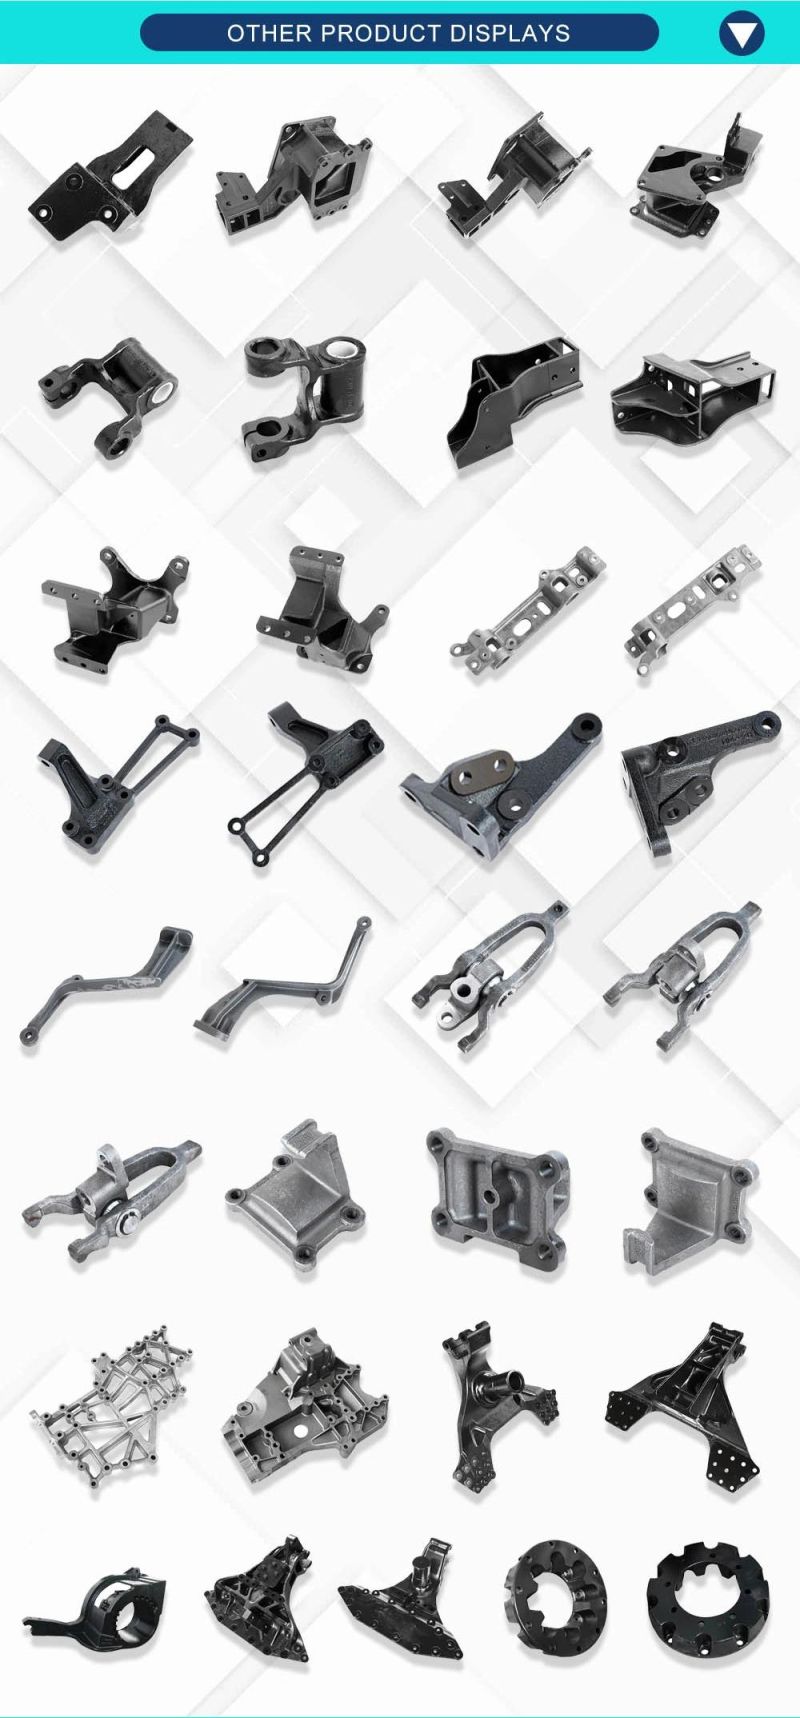 Heavy Truck Spare Parts Supplier of Various Types of Truck Parts